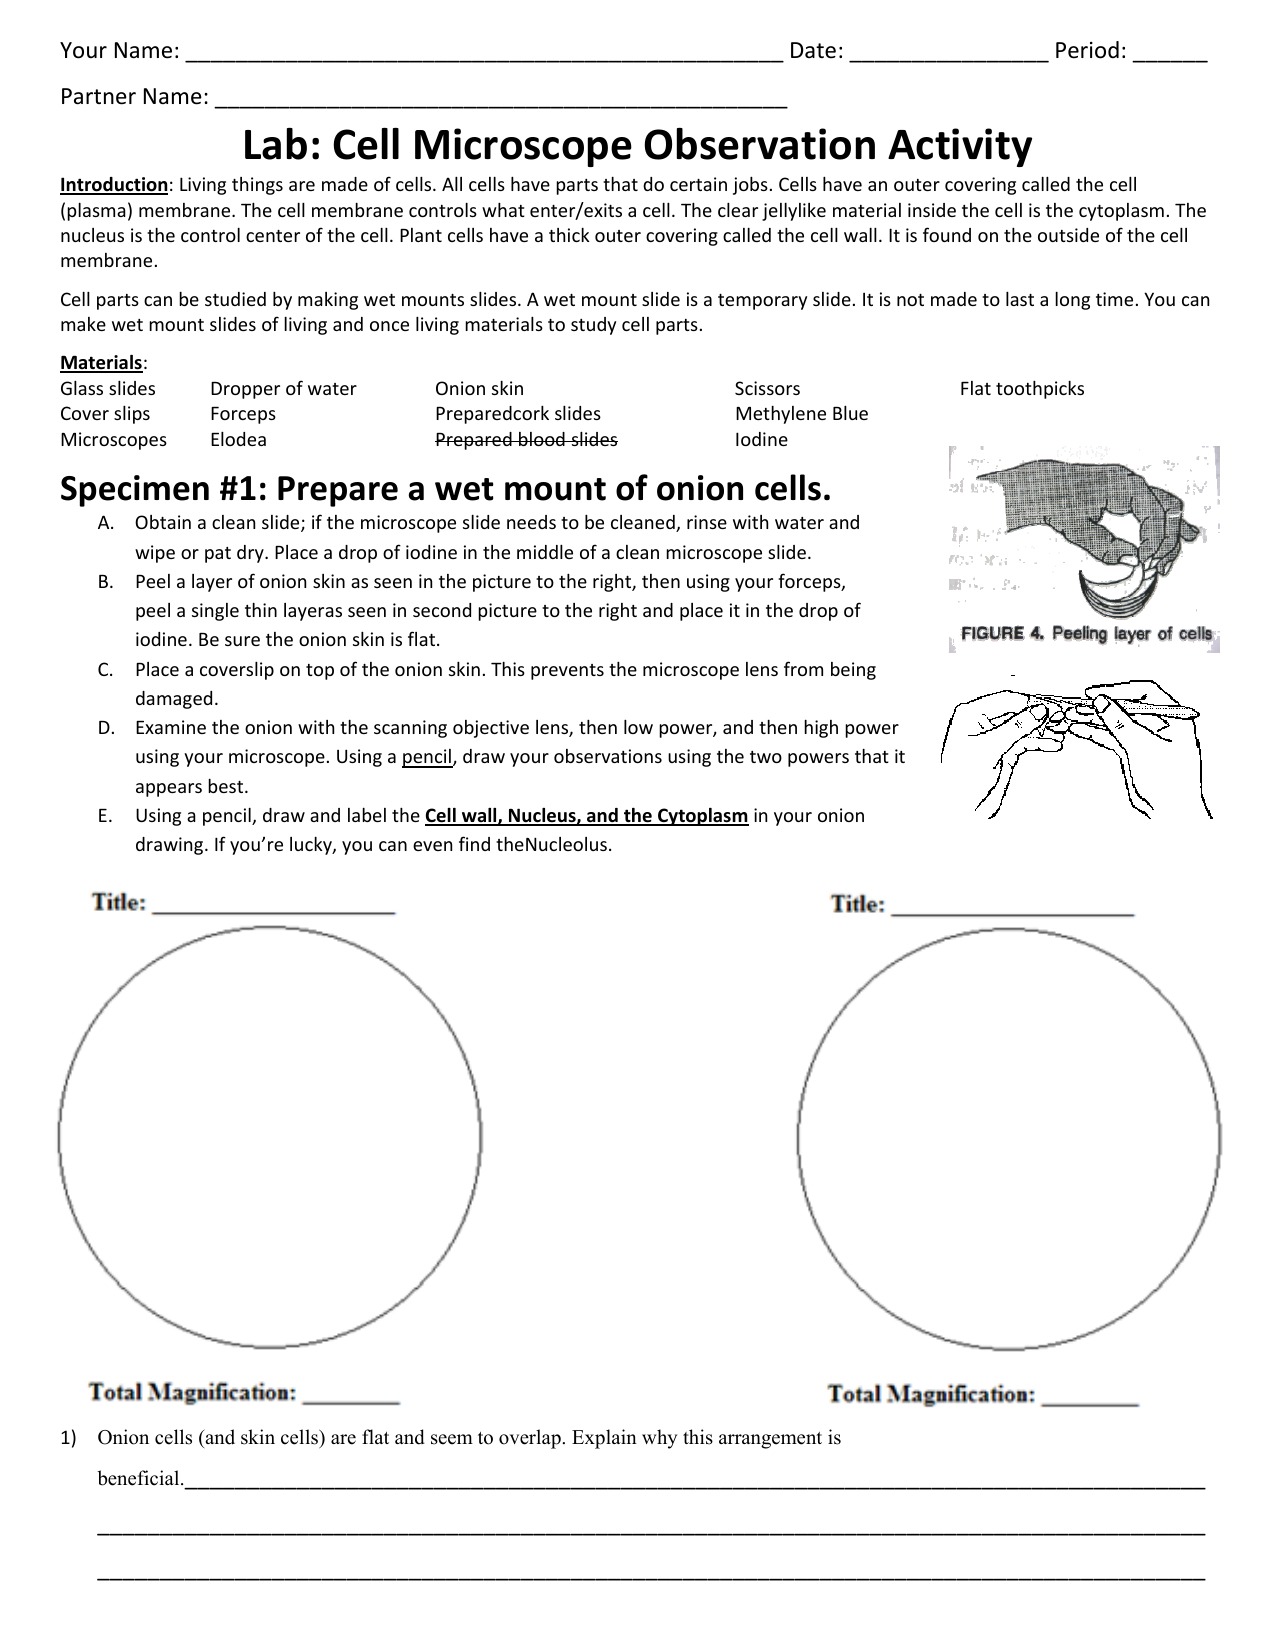 ️Microscope Observation Worksheet Free Download Goodimg co